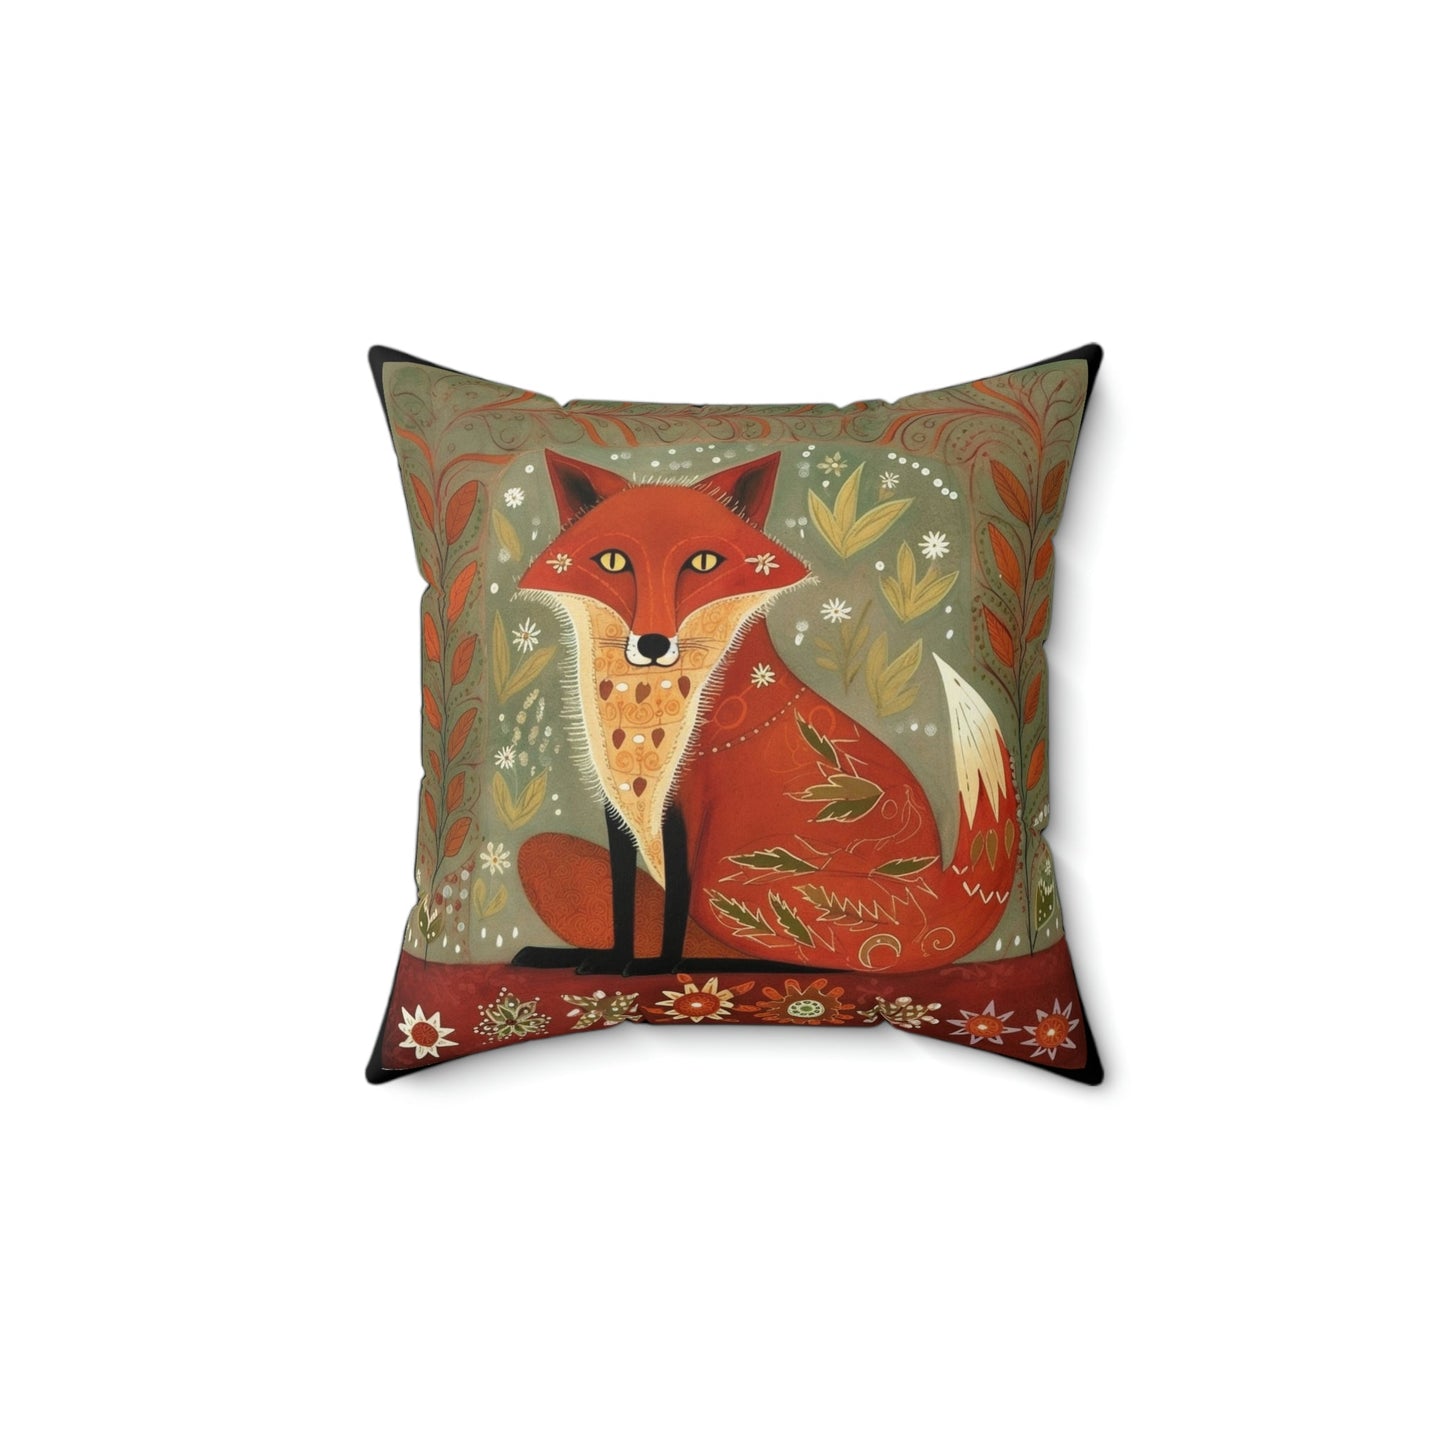 Folk Art Red Fox Design Square Pillow - Cottagecore Country Farm Style Gift for Yourself or Loved Ones